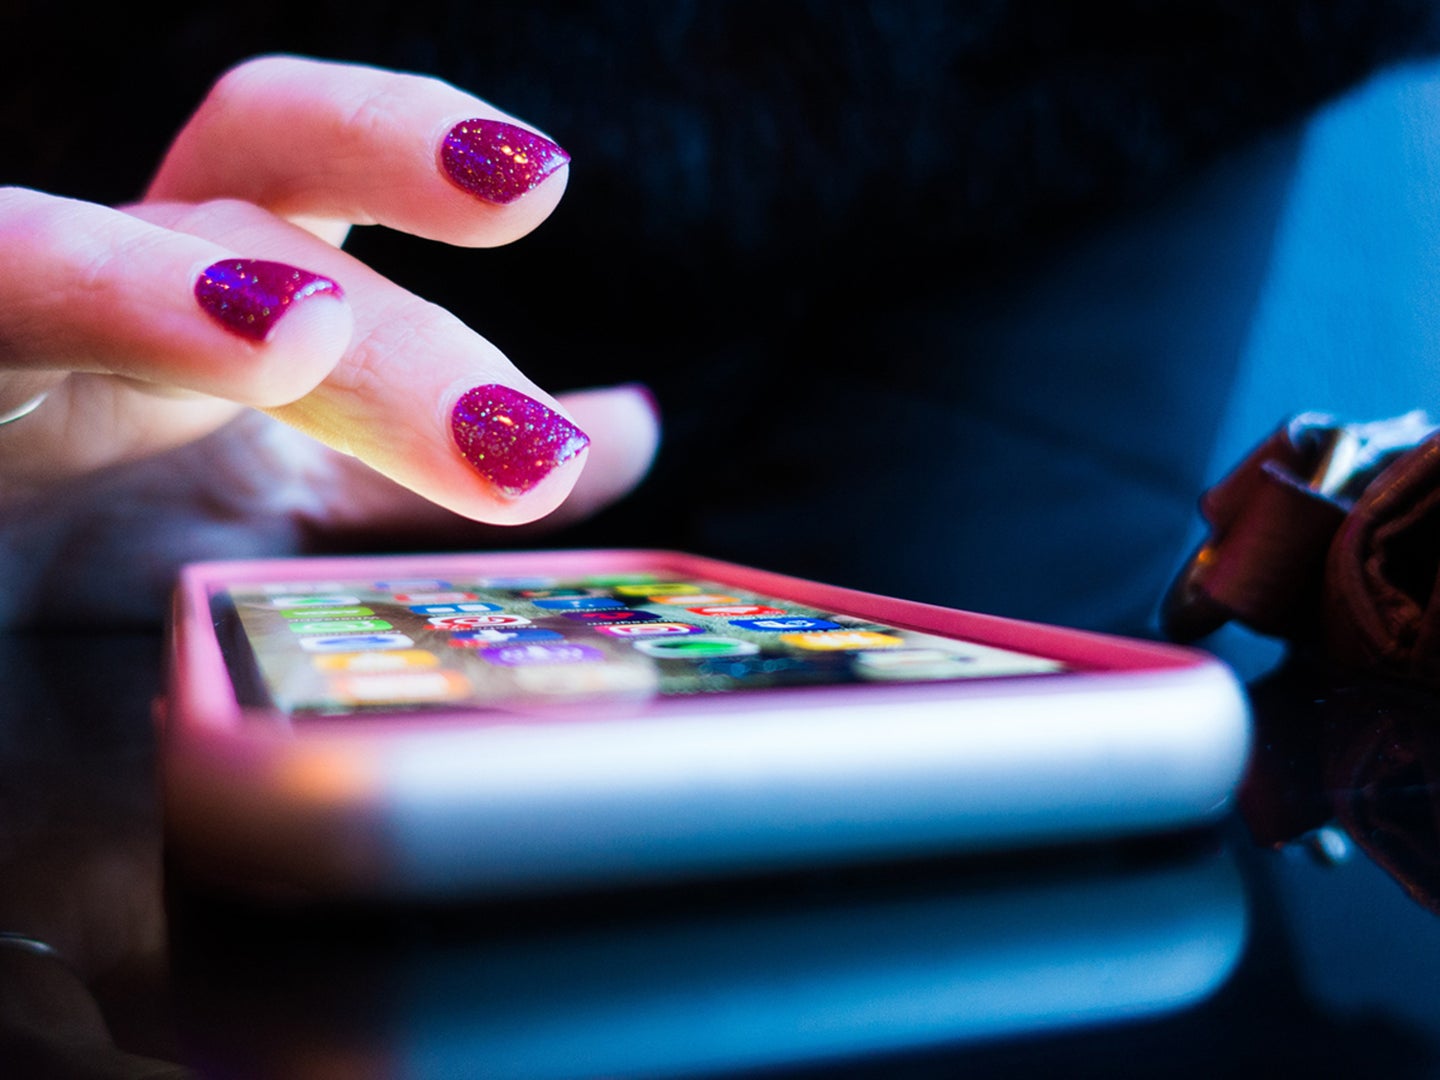 A hand with magenta painted nails reaches out from the darkness to tap on a phone lying on a shiny black table.